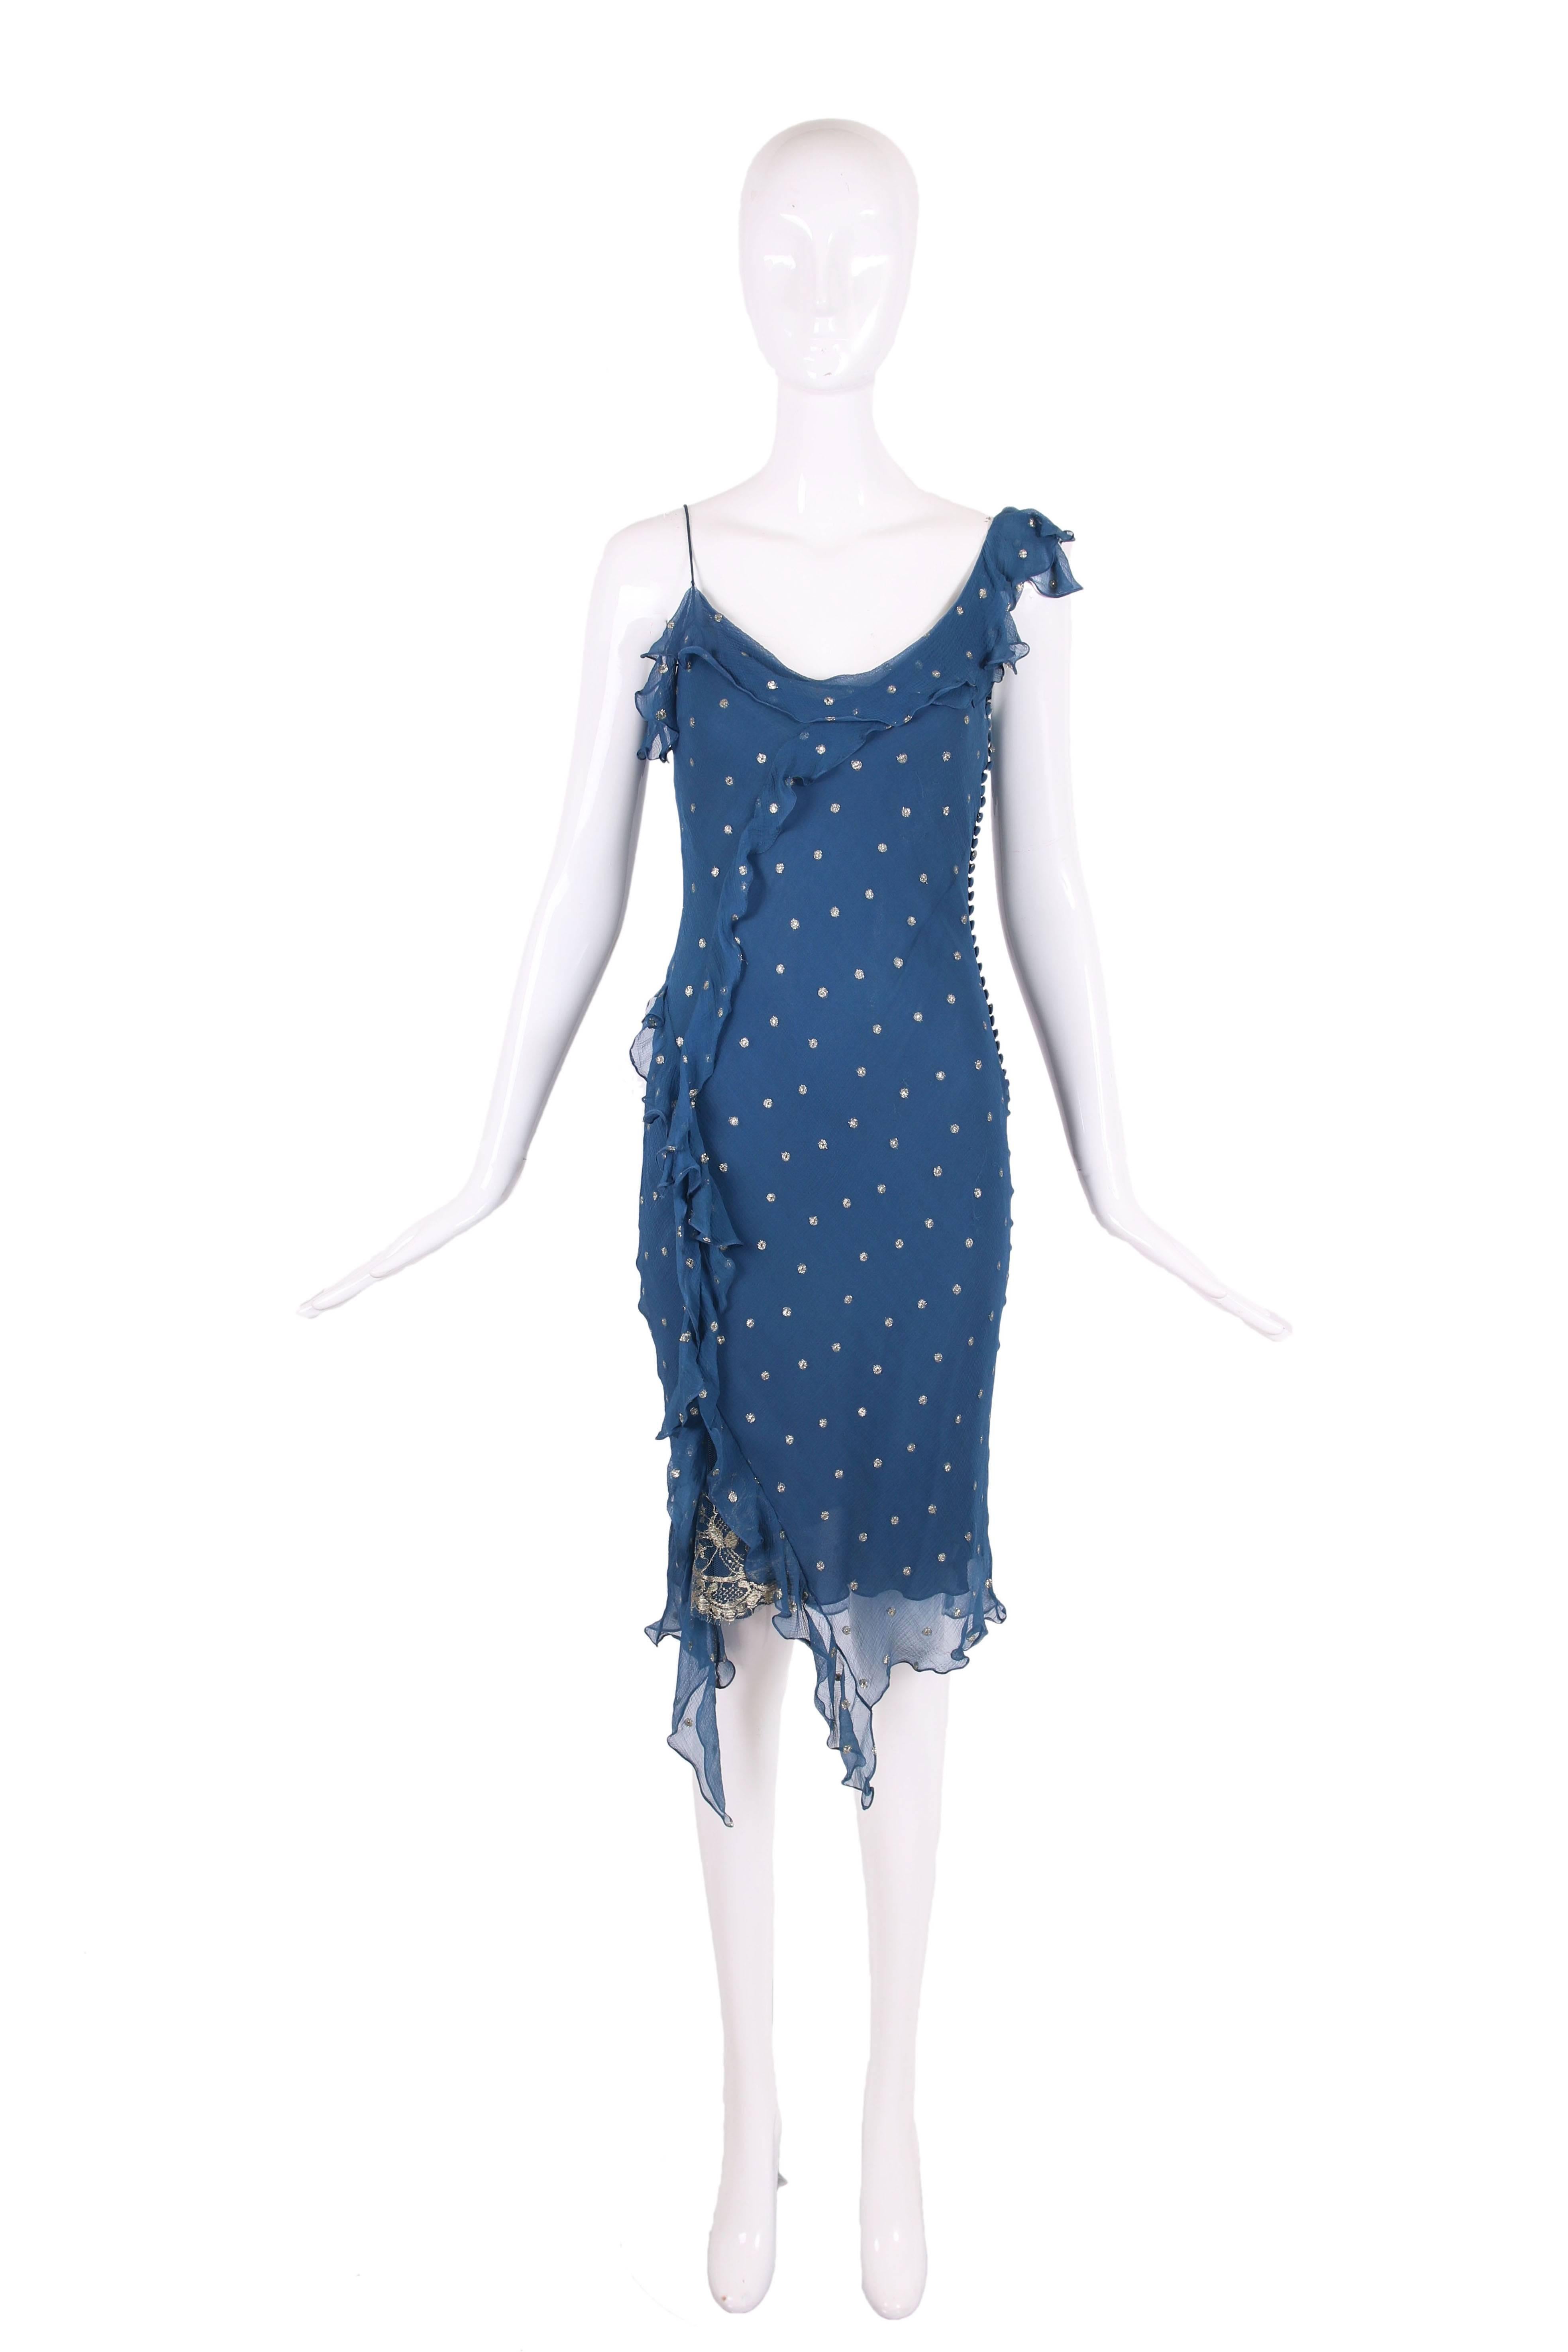 Christian Dior by John Galliano blue silk chiffon bias cut cocktail dress with metallic gold polka dots and a gold metallic lace insert at the side seam hem. There is a blue slip attached underneath. In very good condition with some minor pulls to